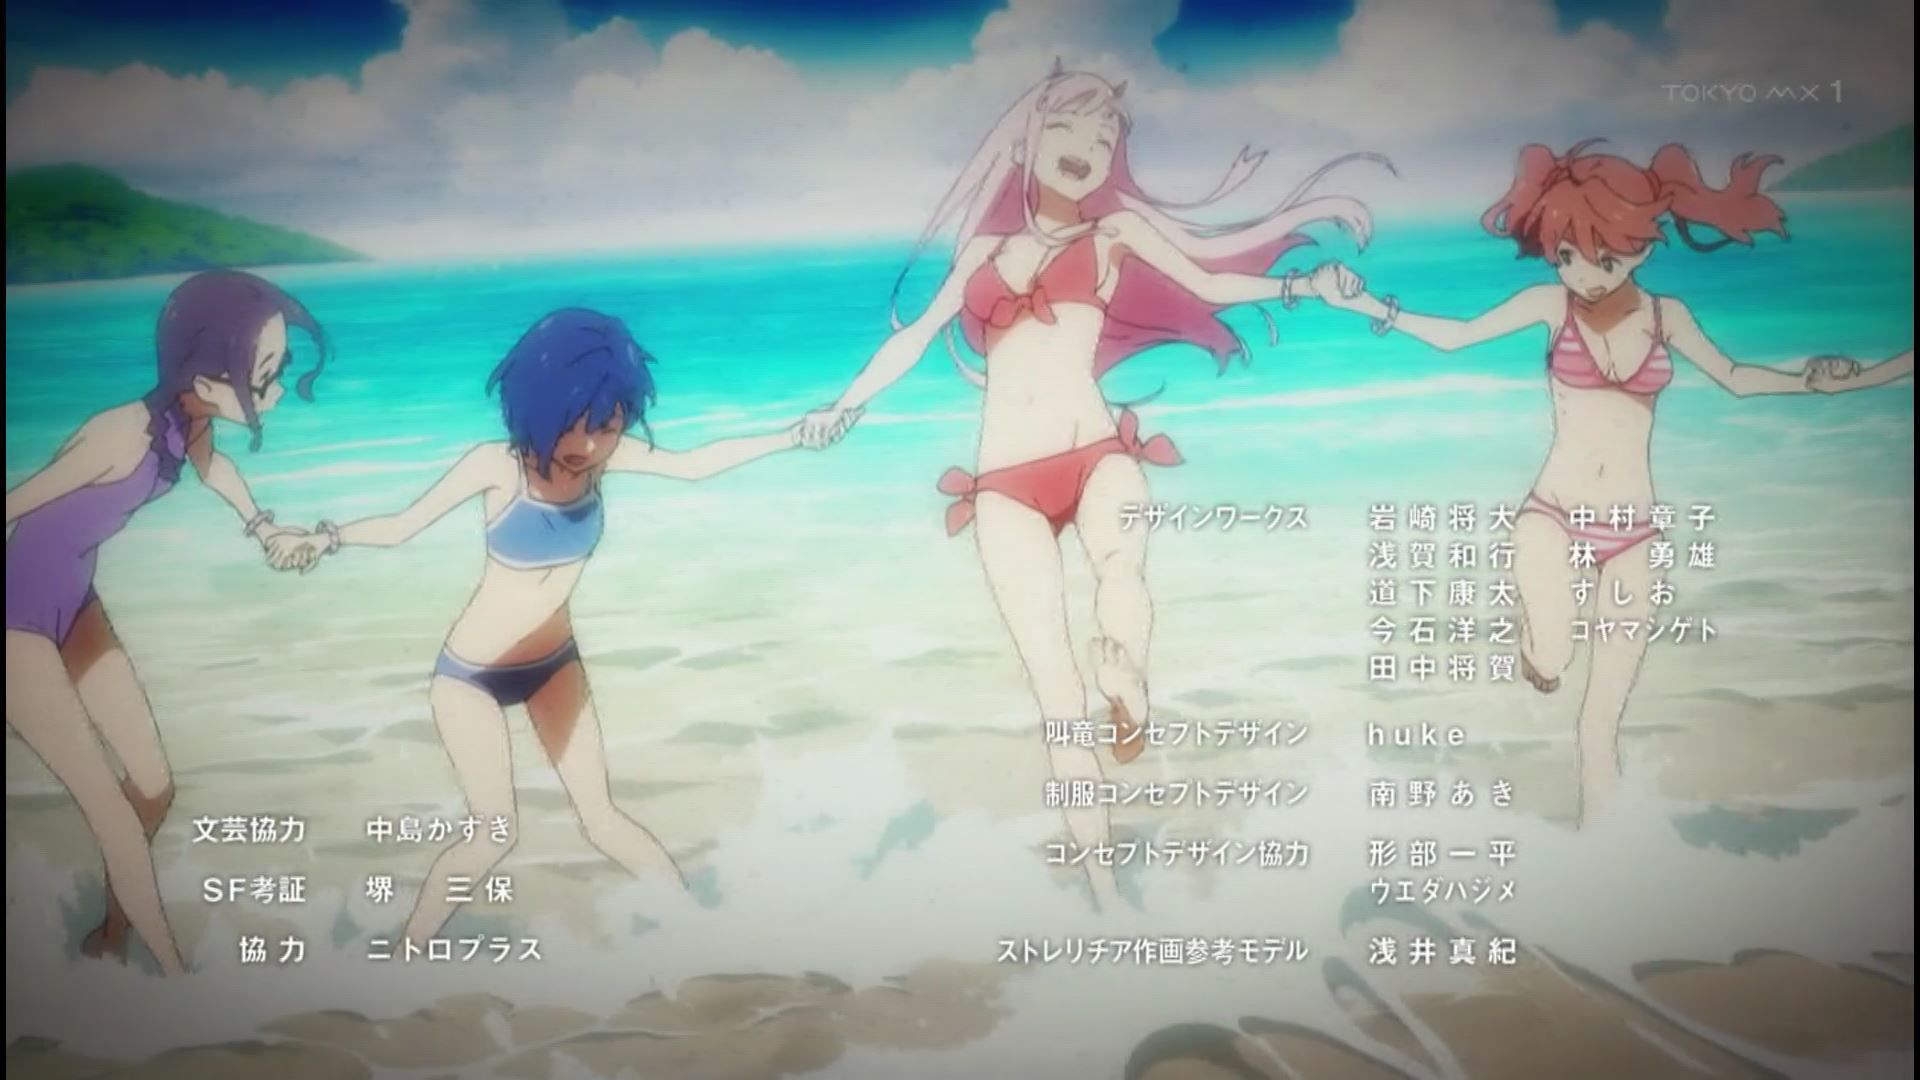 Anime [Darling in the franc kiss] seven girls erotic breasts and buttocks swimsuit times in the story! 30